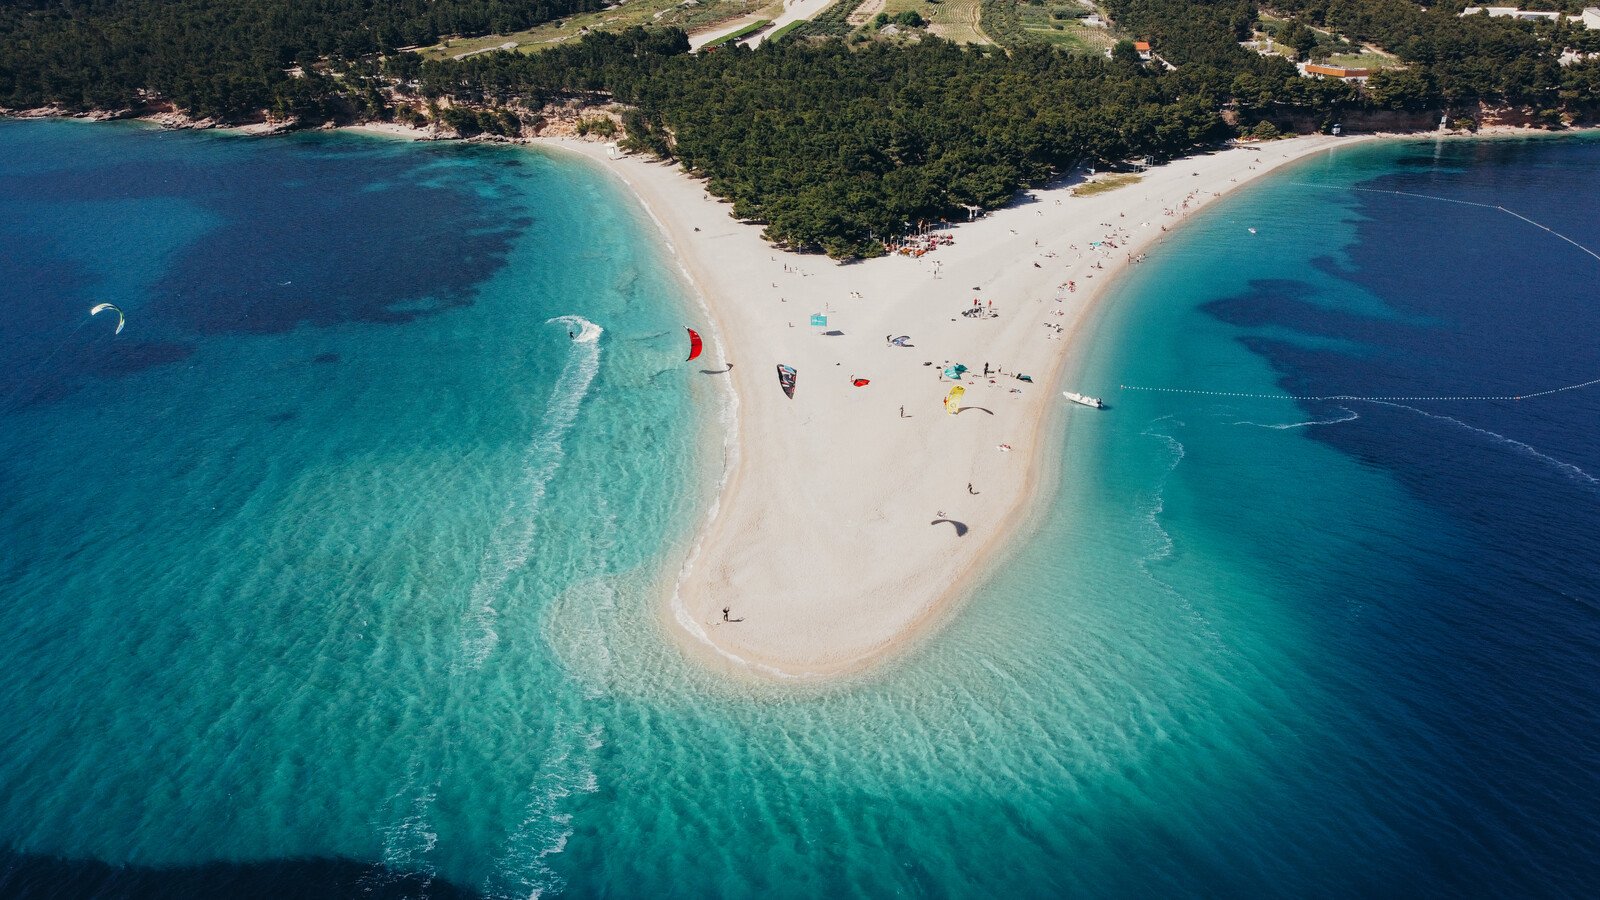 A drone shot above a large sand bar with turquoise blue water surrounding it and shades of blue as the water gets deeper, beach is busy with beach goers and kitesurfers are in the water